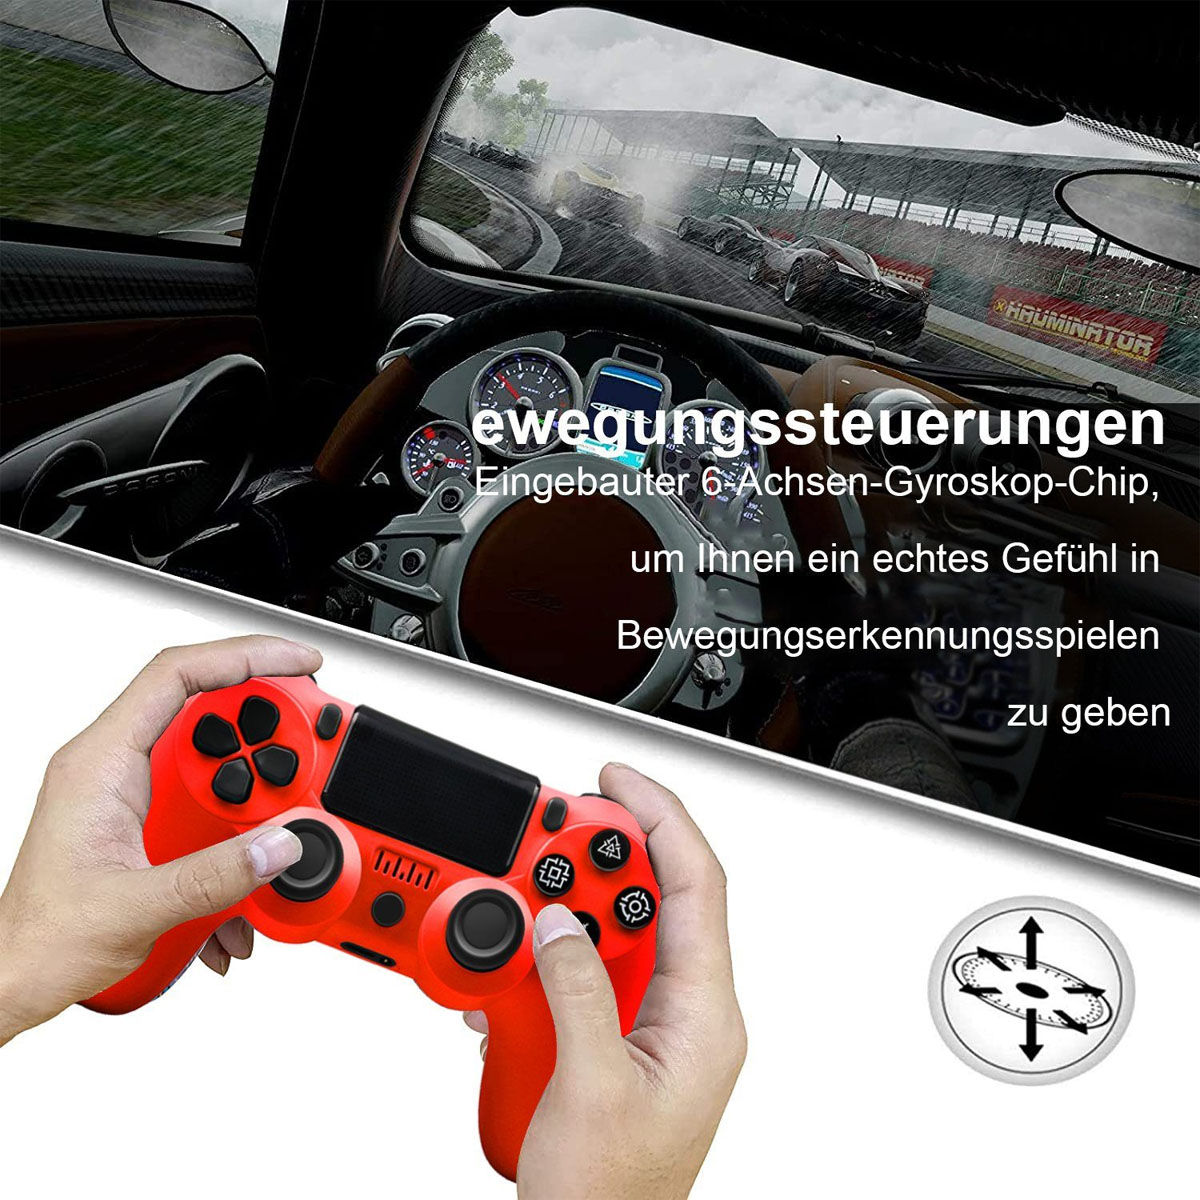 TADOW Gamepad, rot Controller, Wireless für PC/PS3/PS4 Bluetooth Controller Rot,